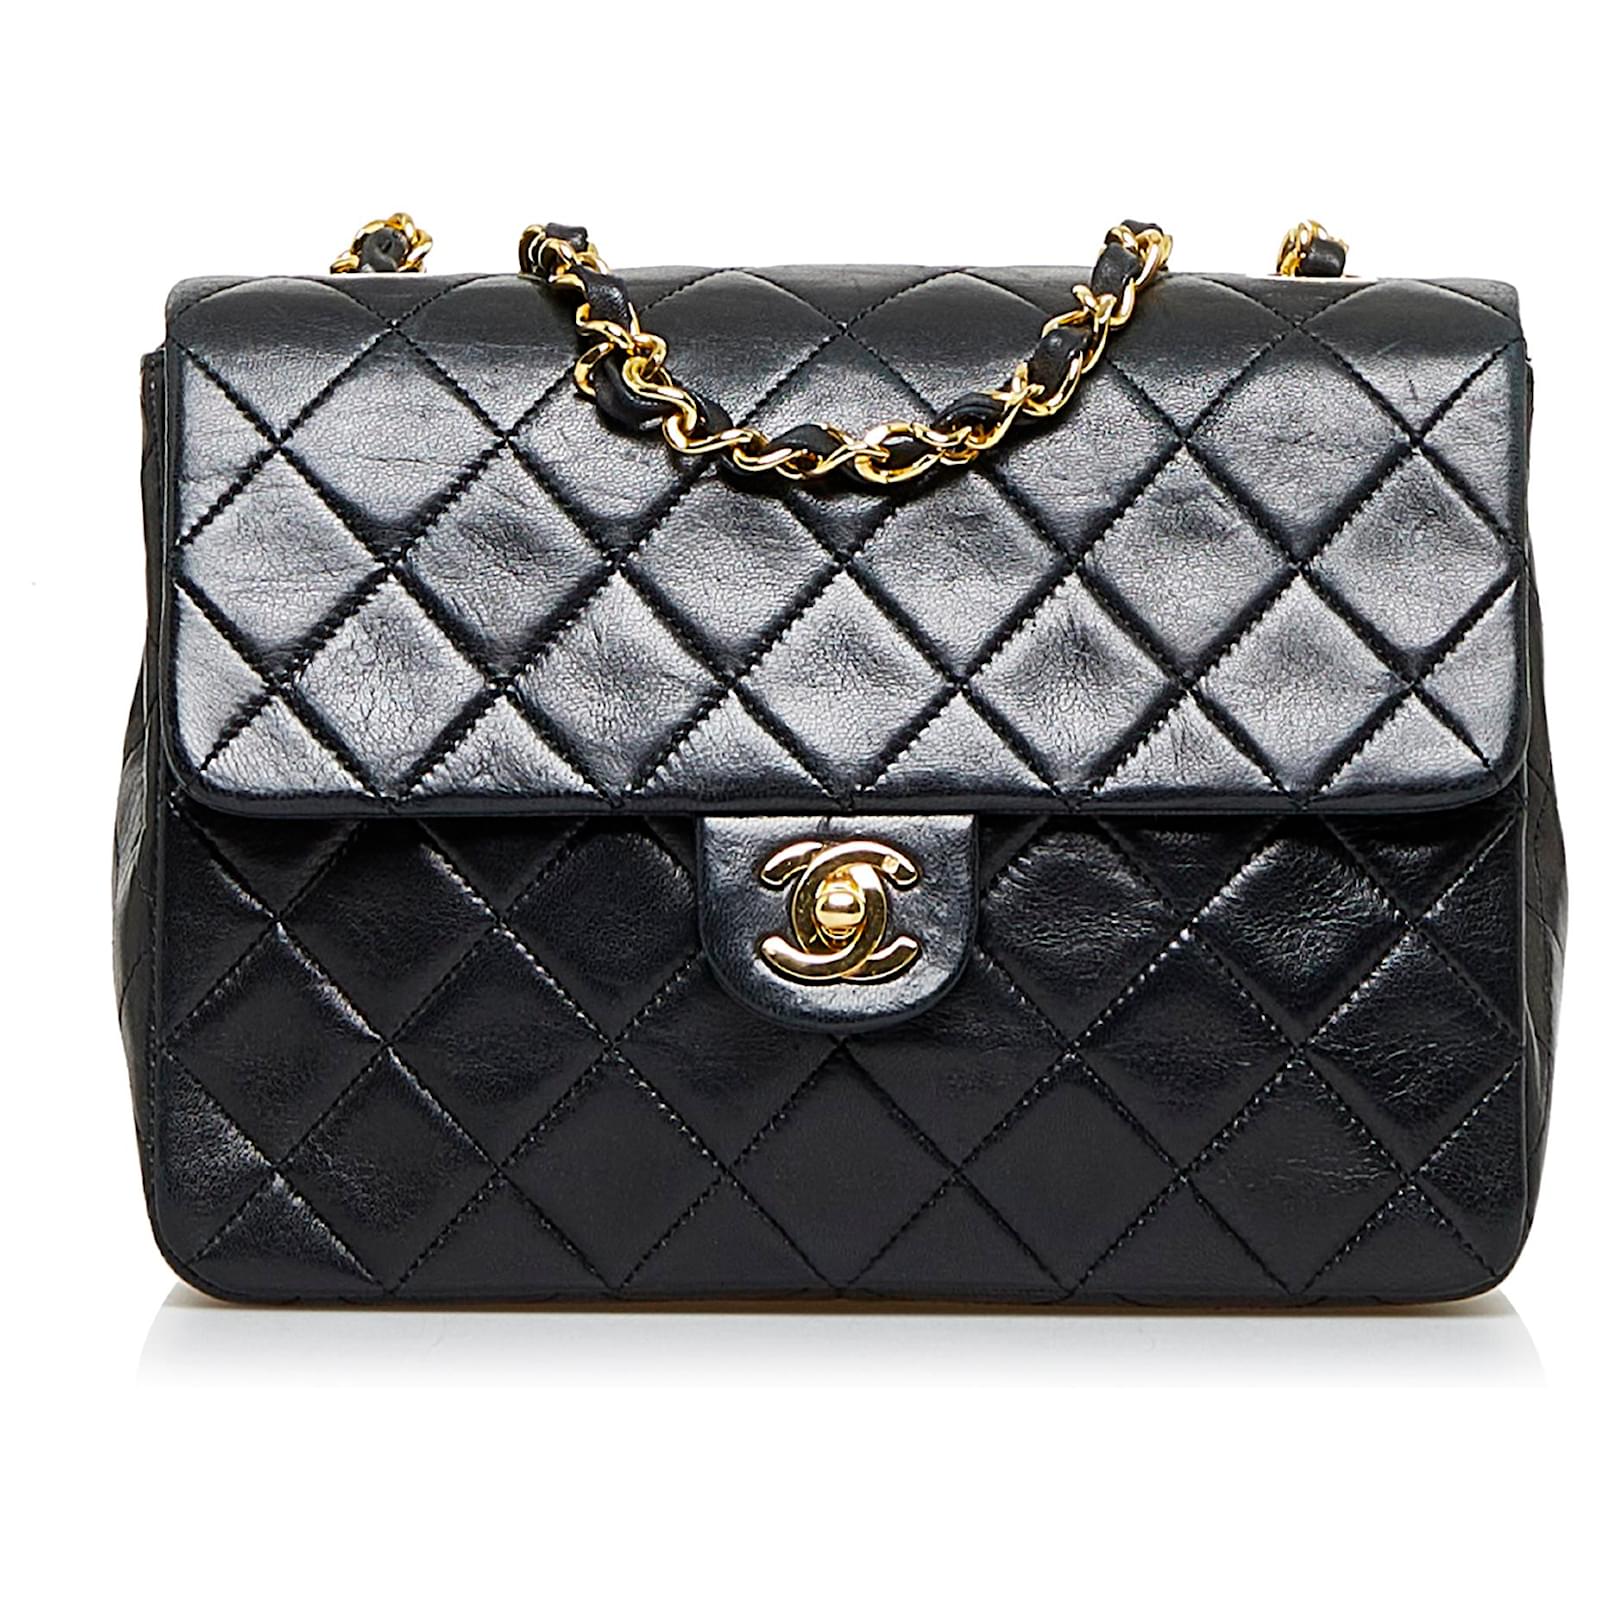 Quilted Twist Lock Flap Square Bag, Chain Strap Crossbody Bag